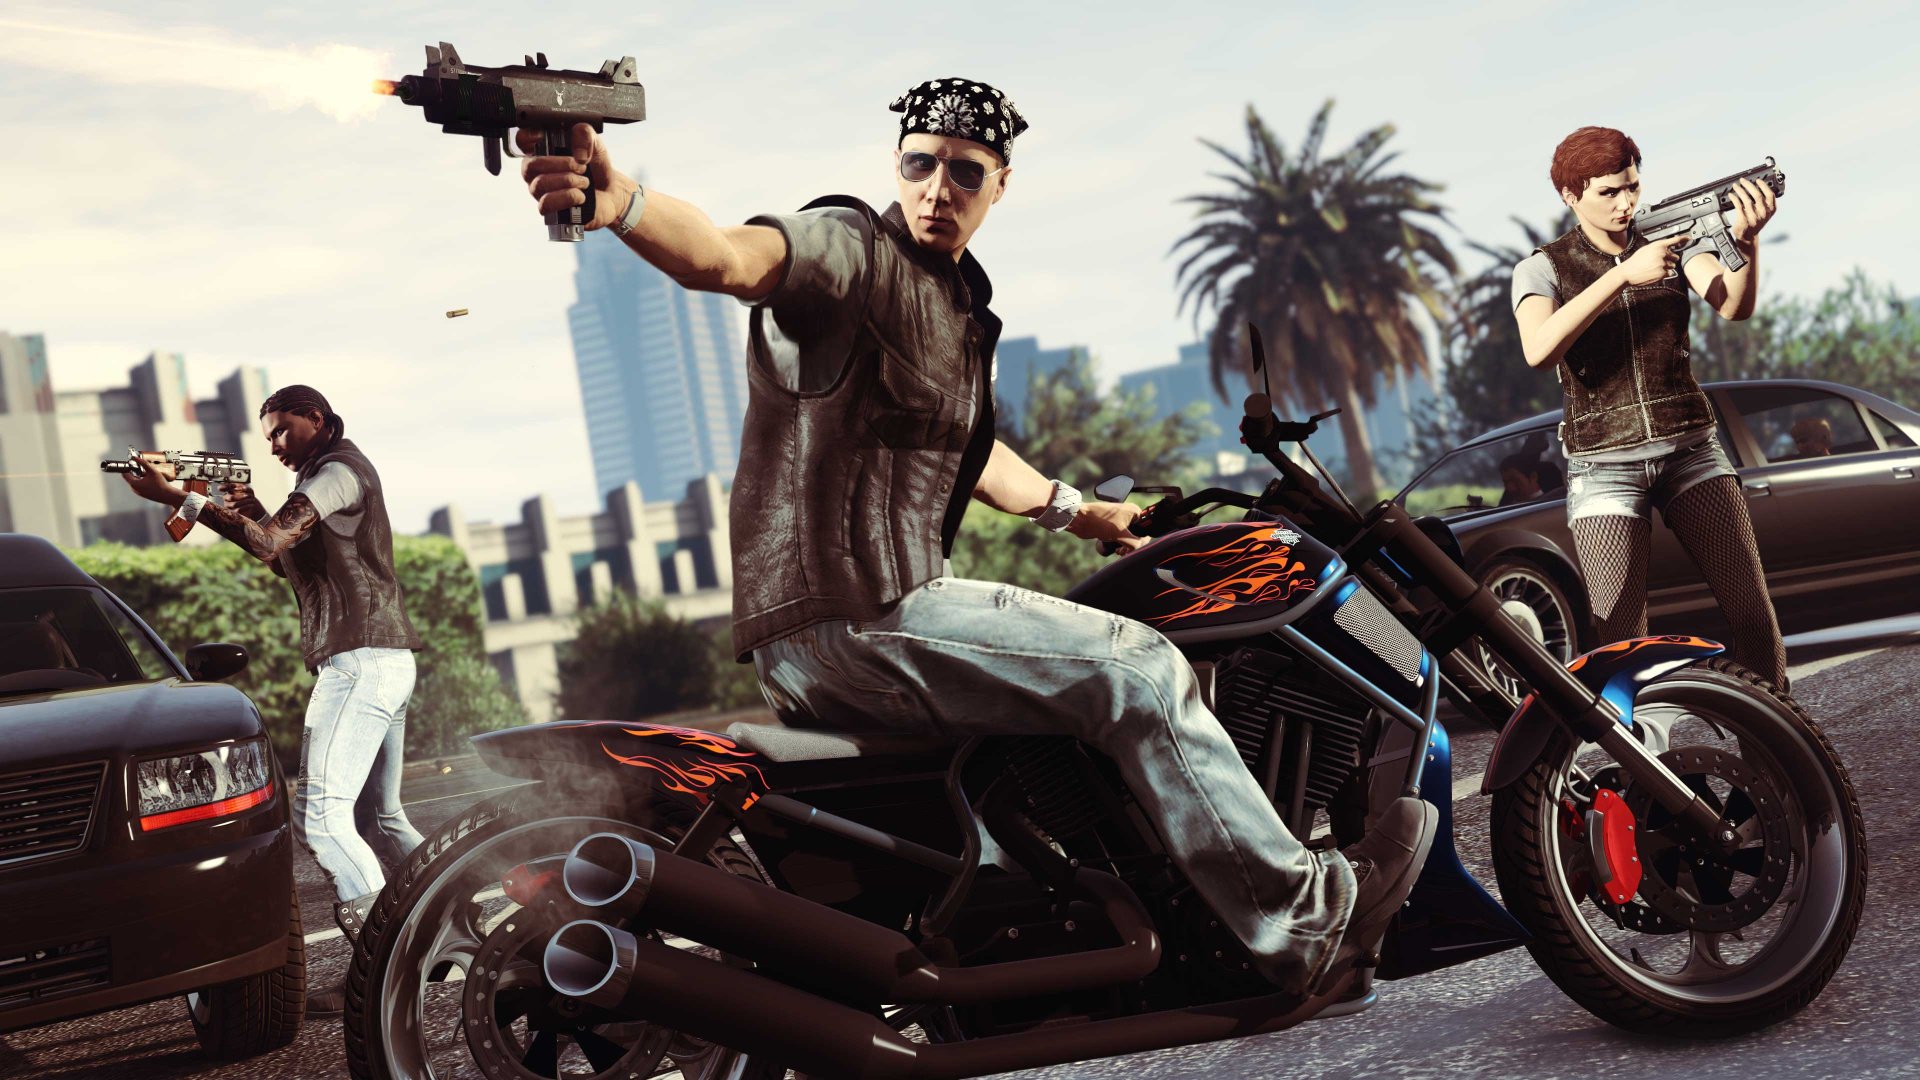 Grand Theft Auto V Online Next-Gen Review - The Open World G.O.A.T